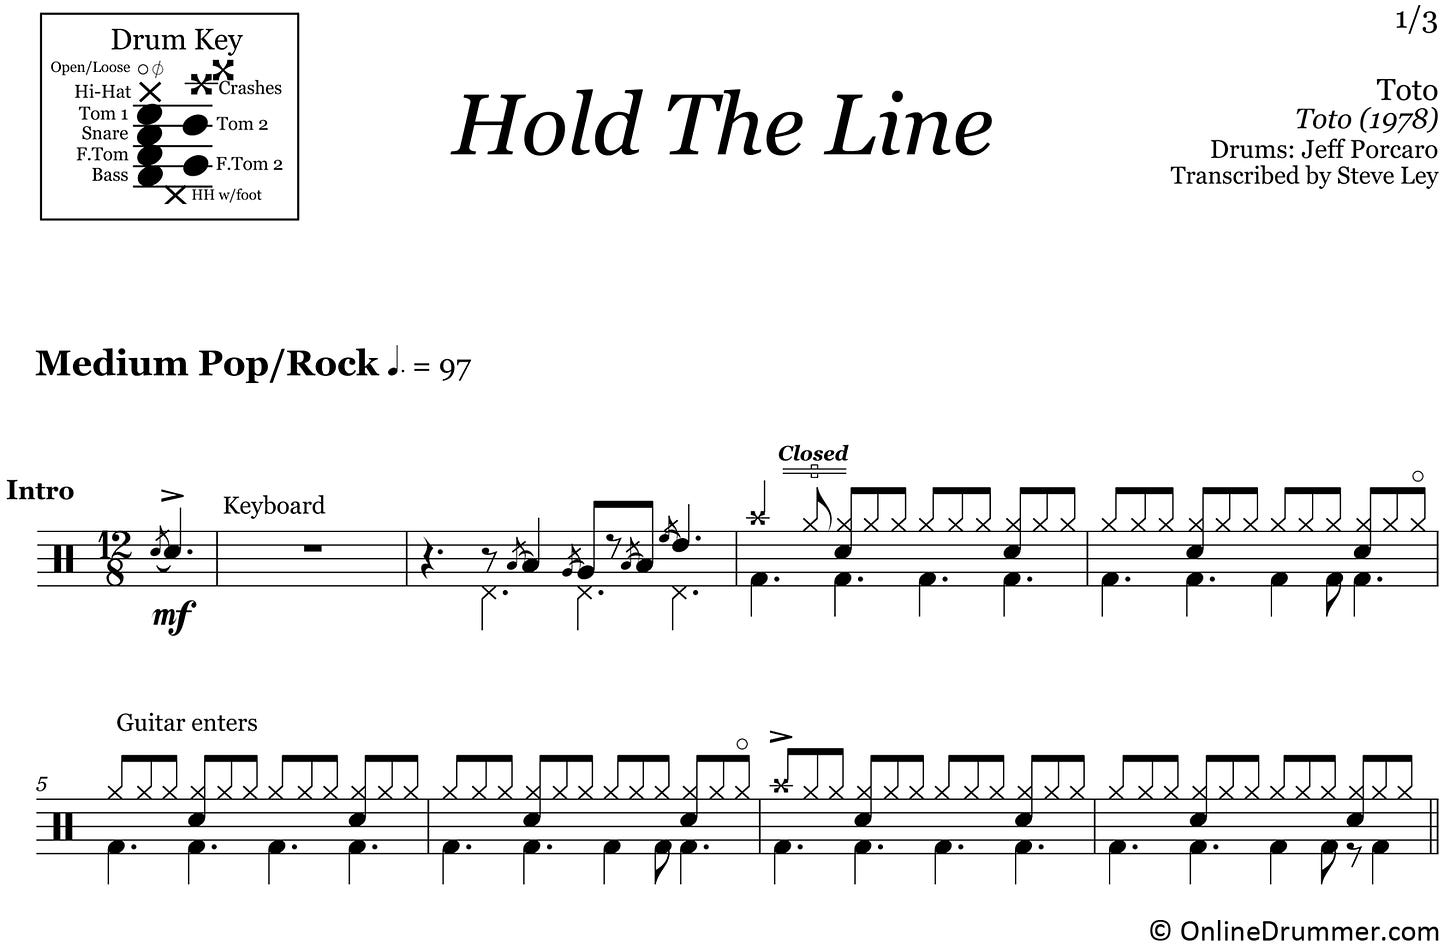 Hold The Line - Toto - Drum Sheet Music | OnlineDrummer.com